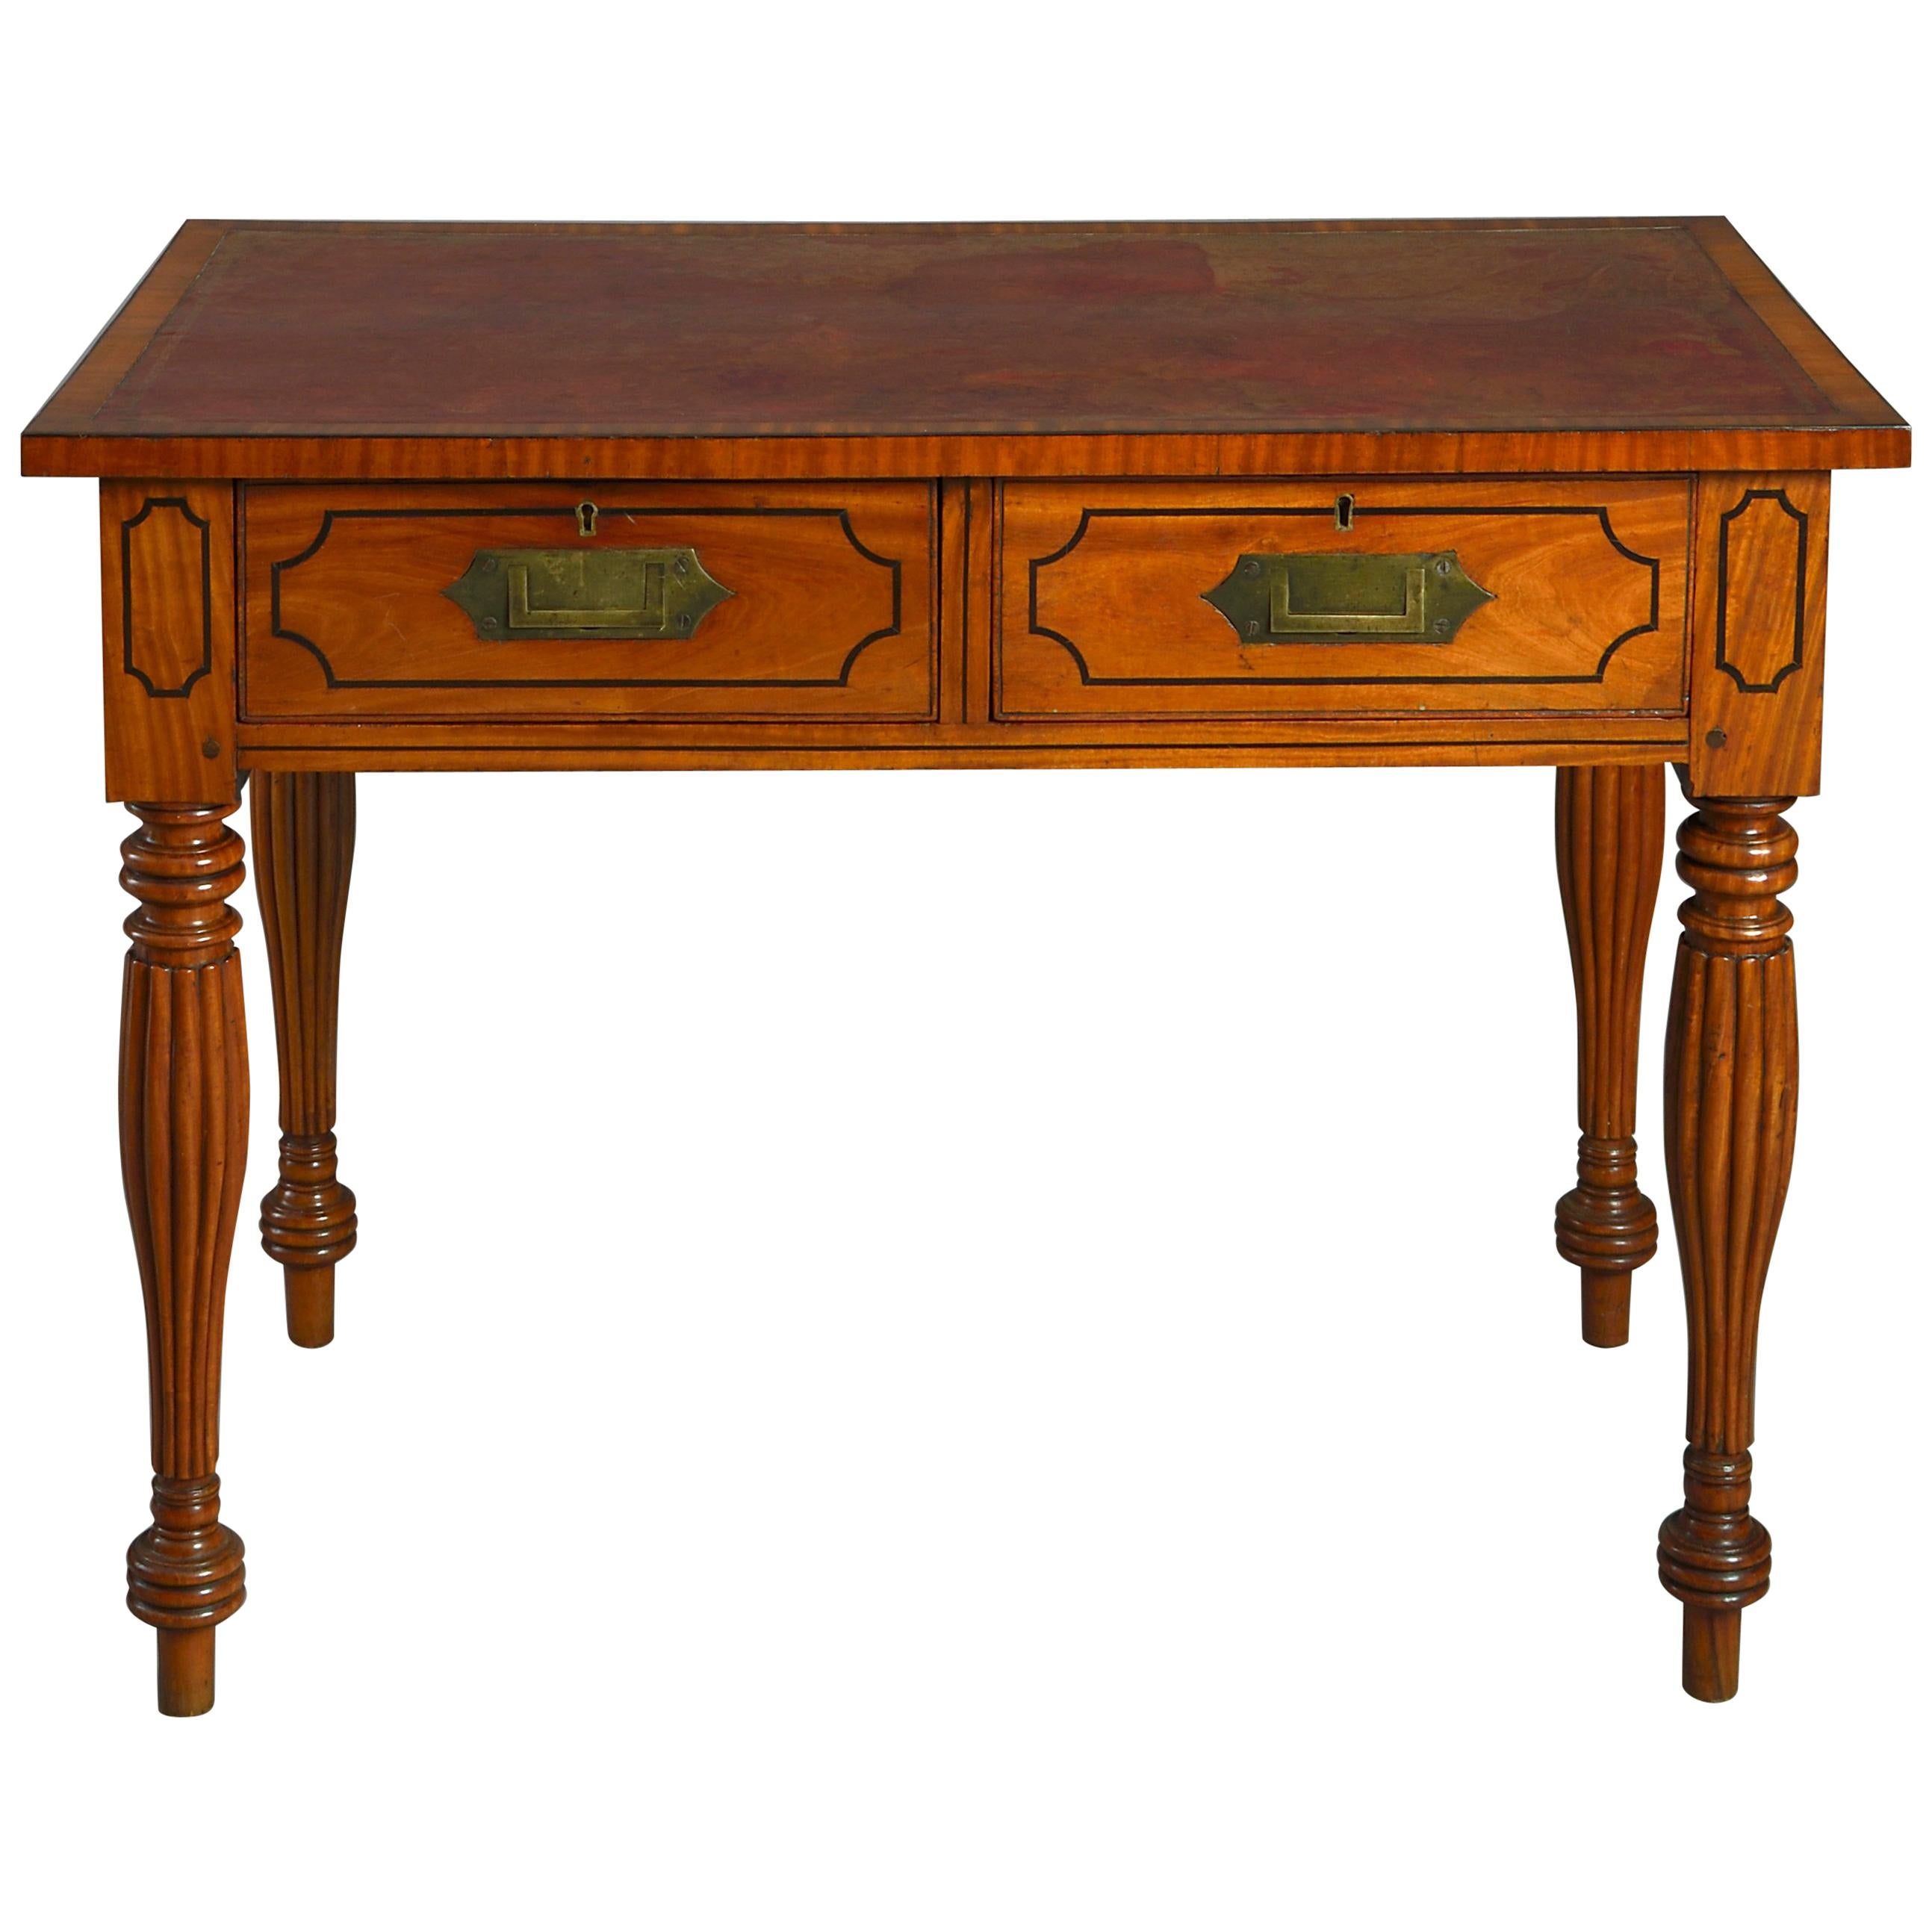 Early 19th Century William IV Period Satinwood Campaign Desk